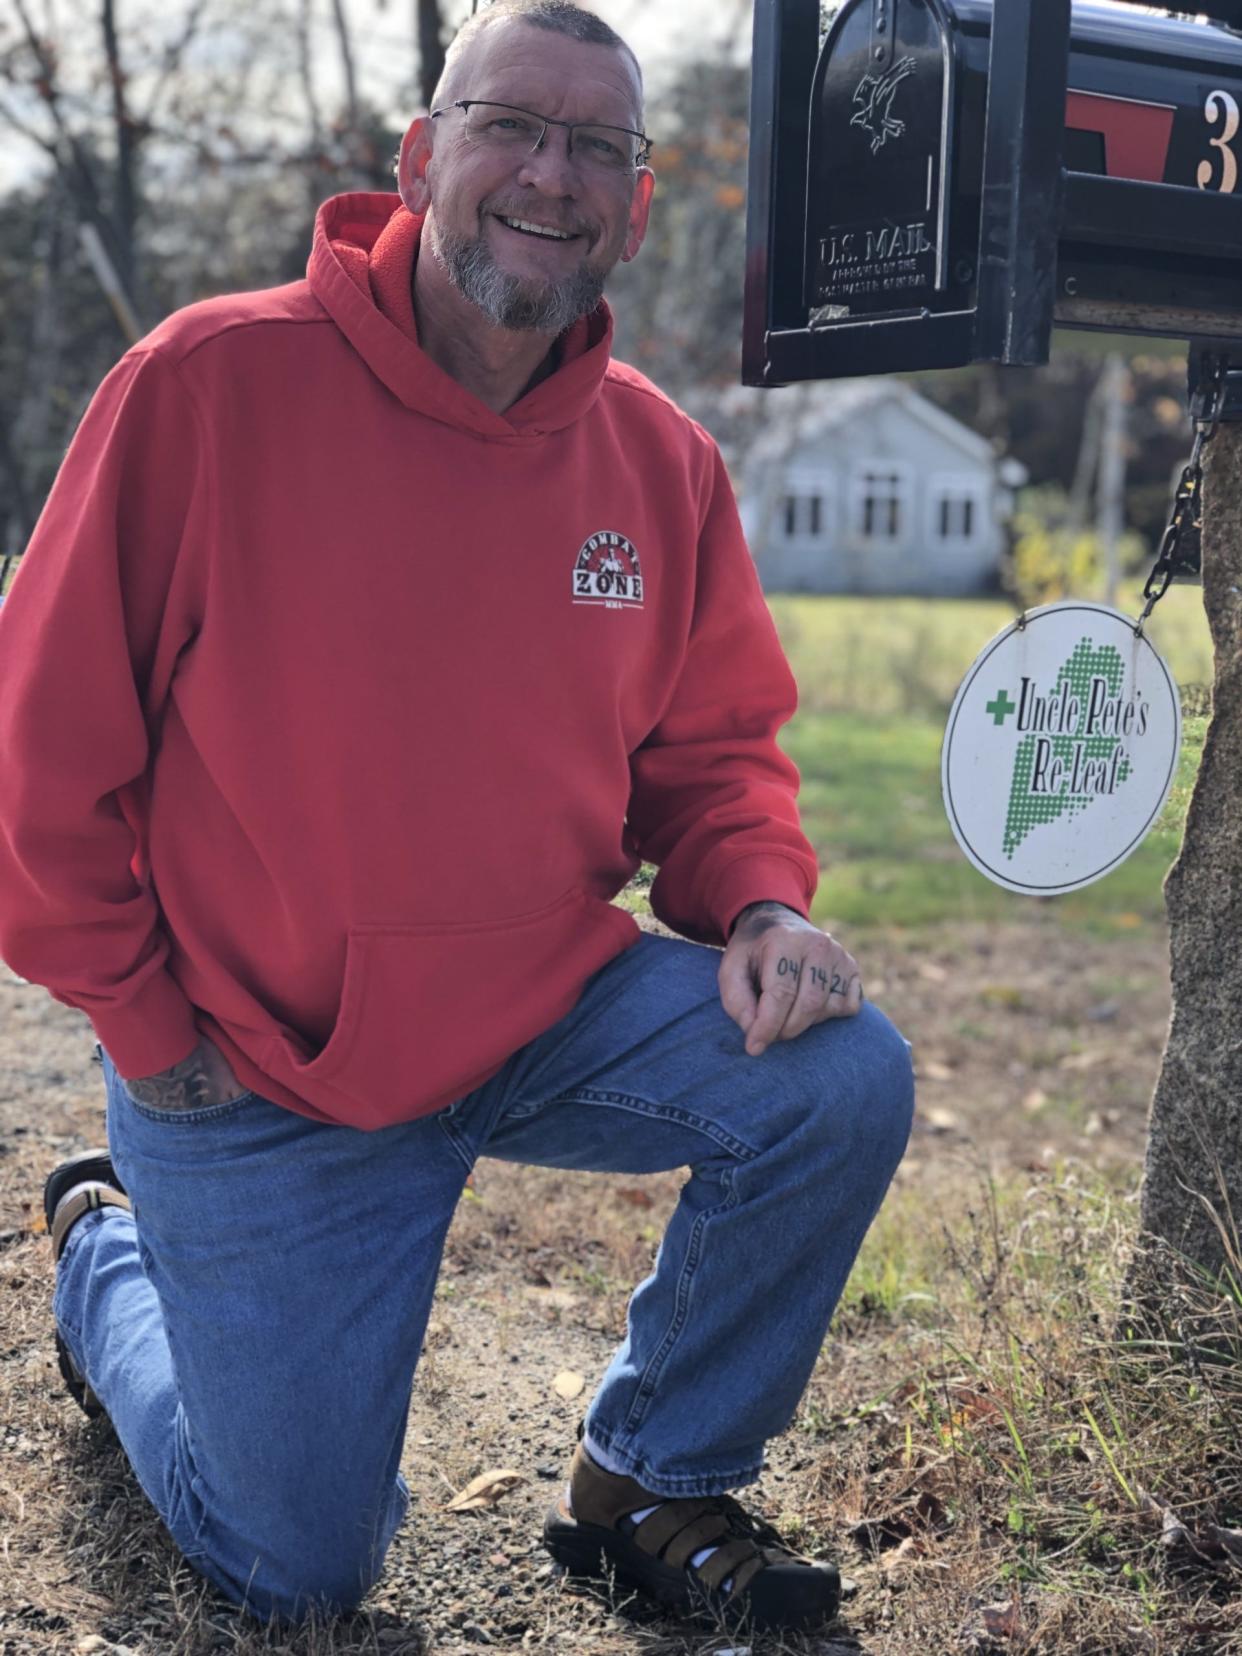 Pete Tranchemontagne is seen here outside his South Sanford home, where he runs his medical cannabis business, Uncle Pete's Re-Leaf. Tranchemontagne is the vice president of the board of directors for the newly formed Maine Cannabis Union.